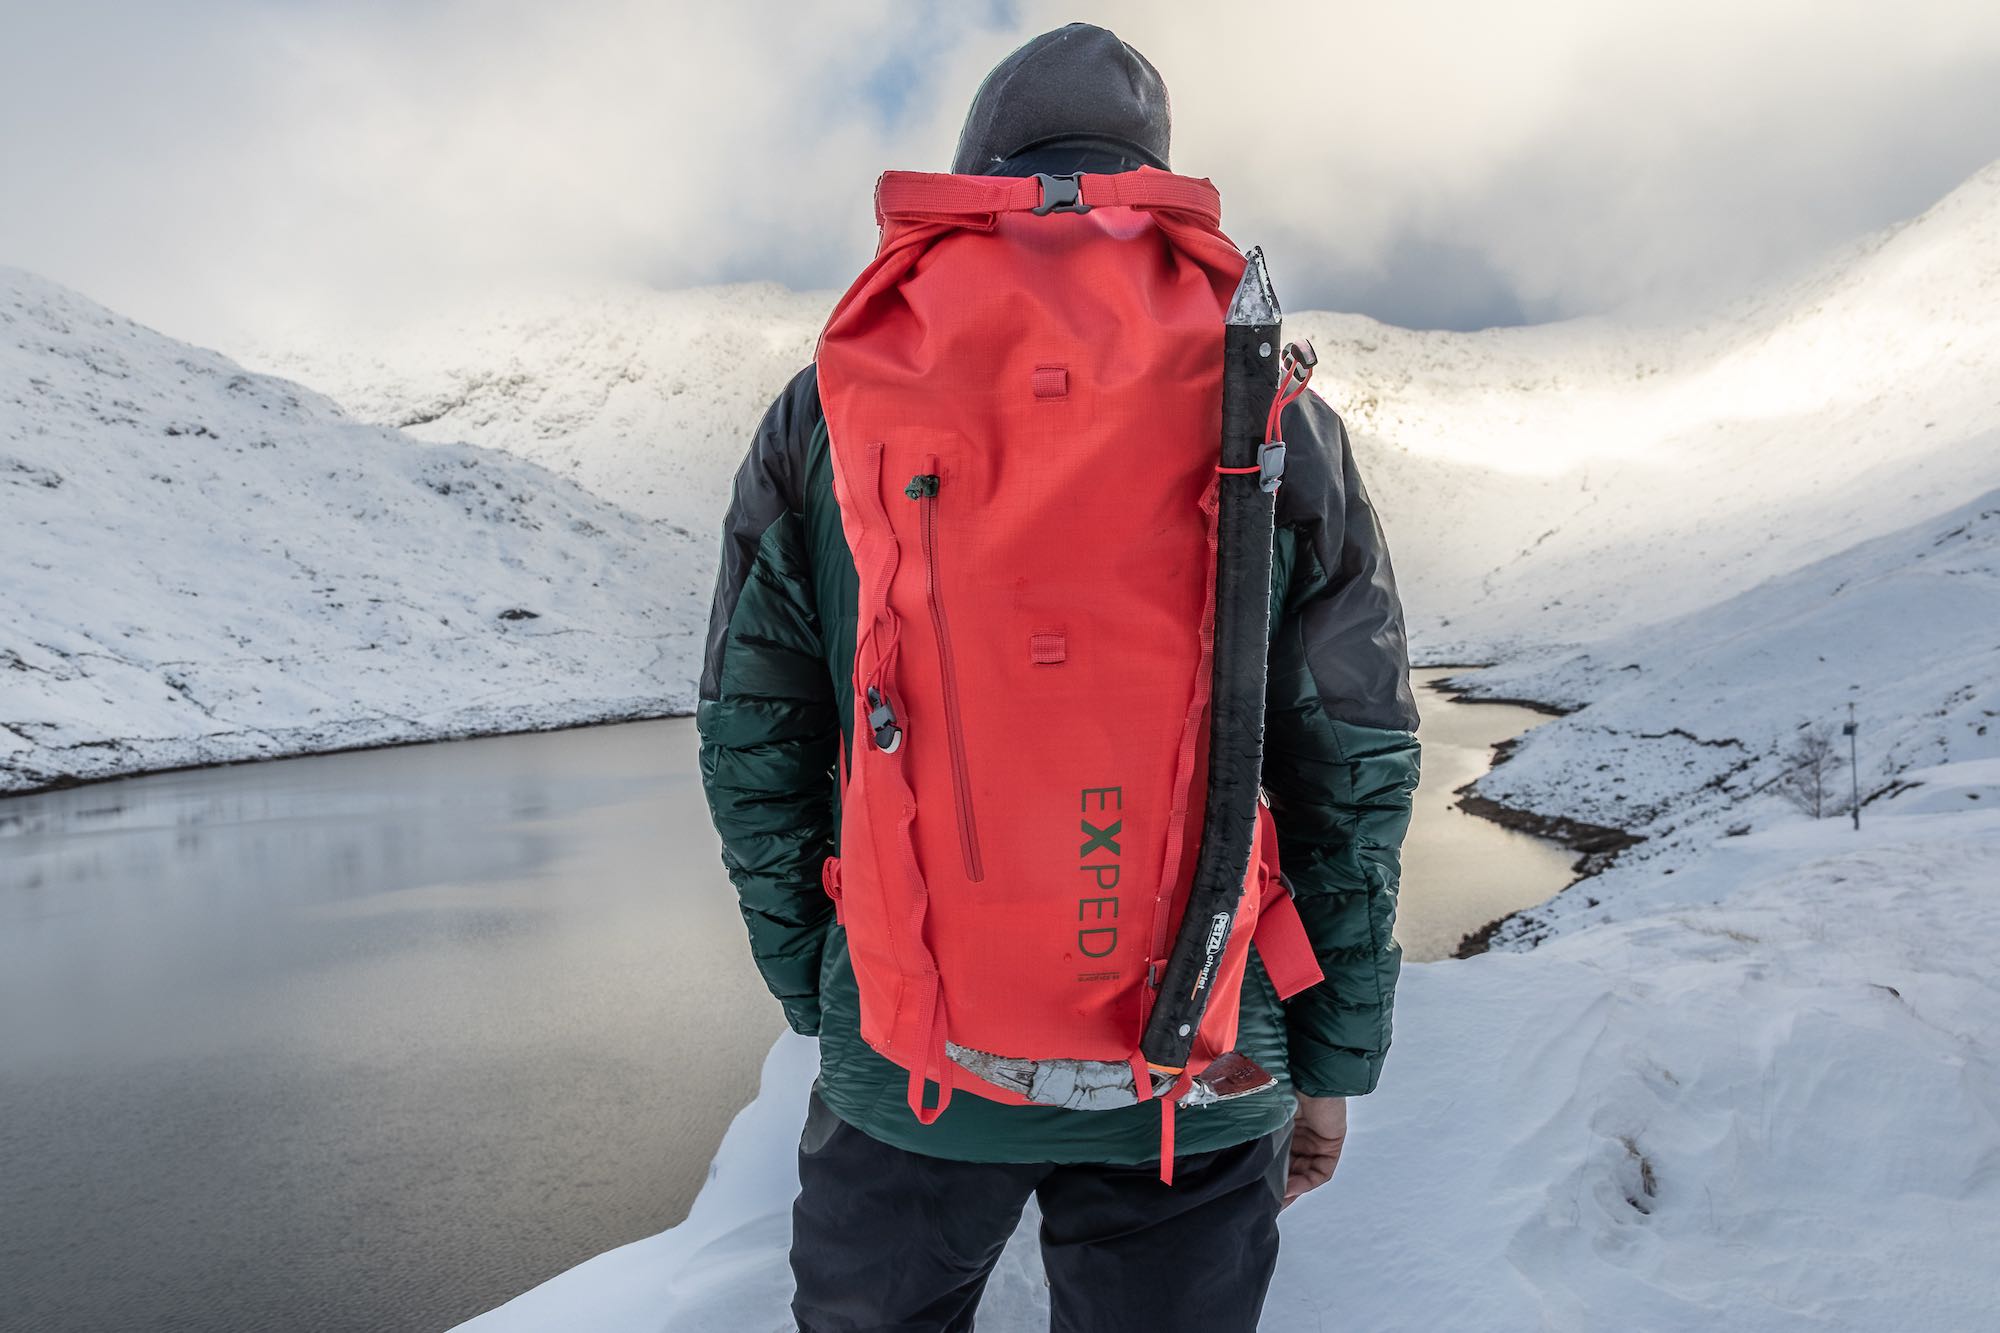 Exped Black Ice 30 review